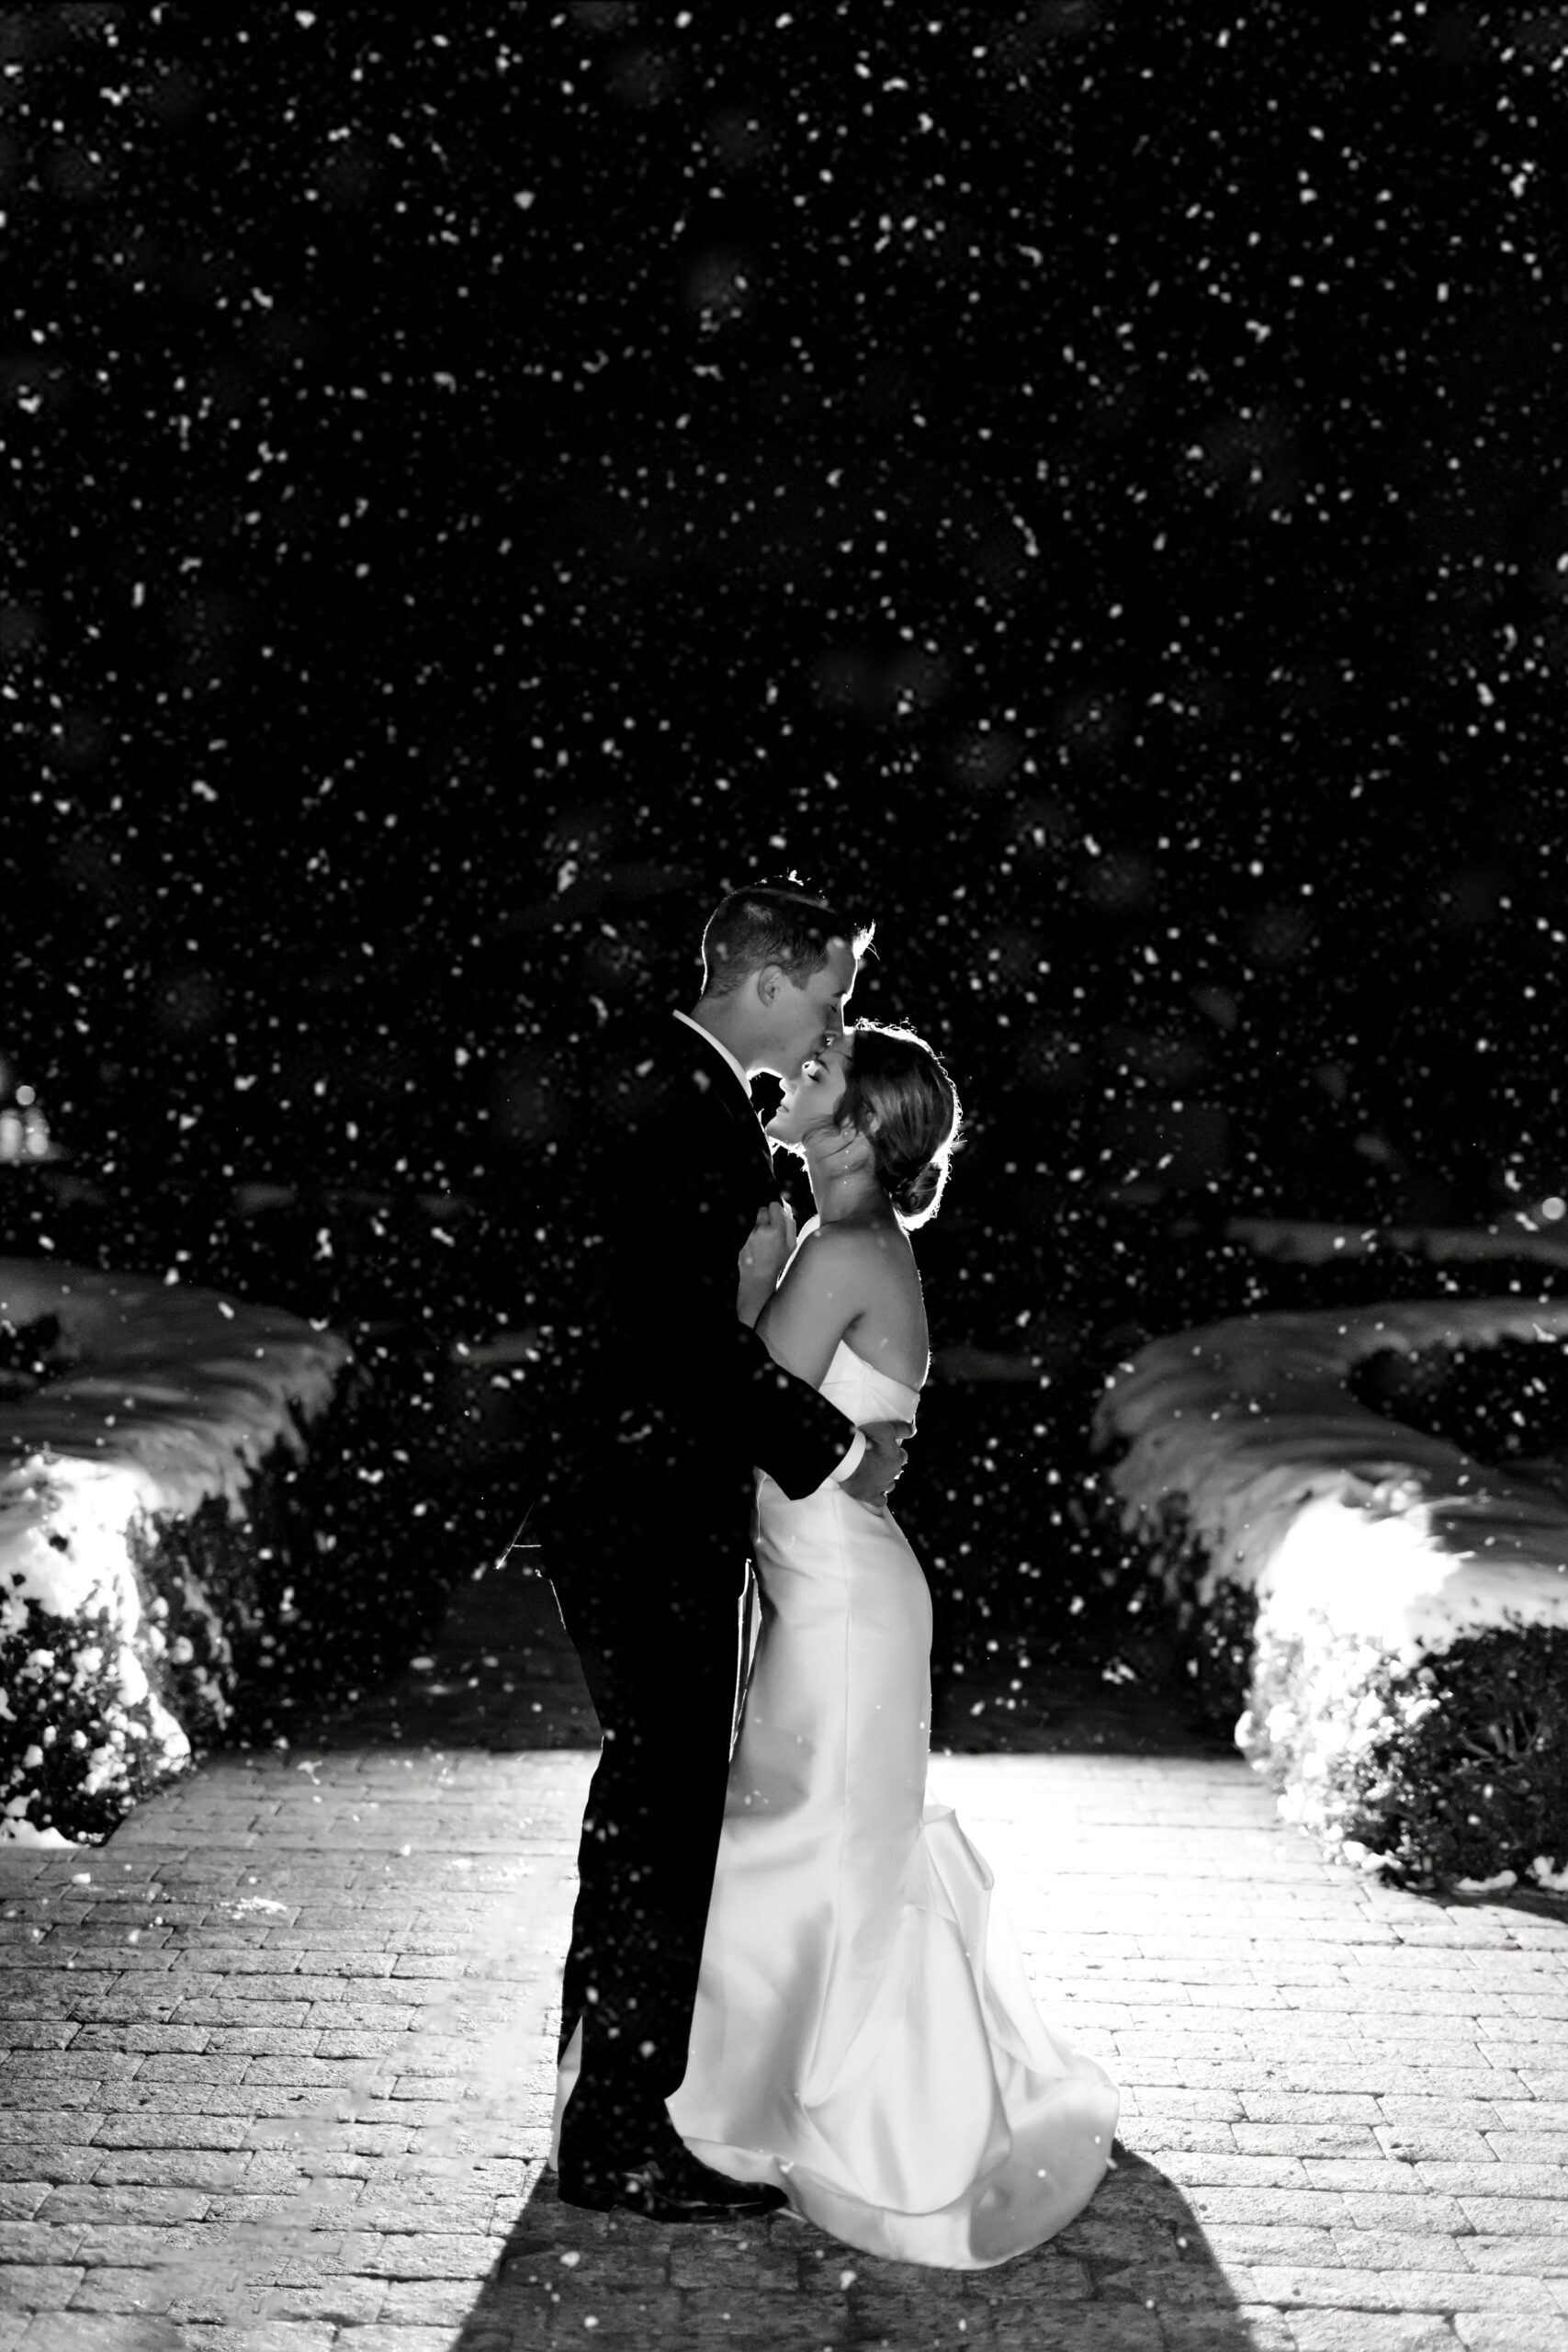 bride and groom nightime portrait in the snow